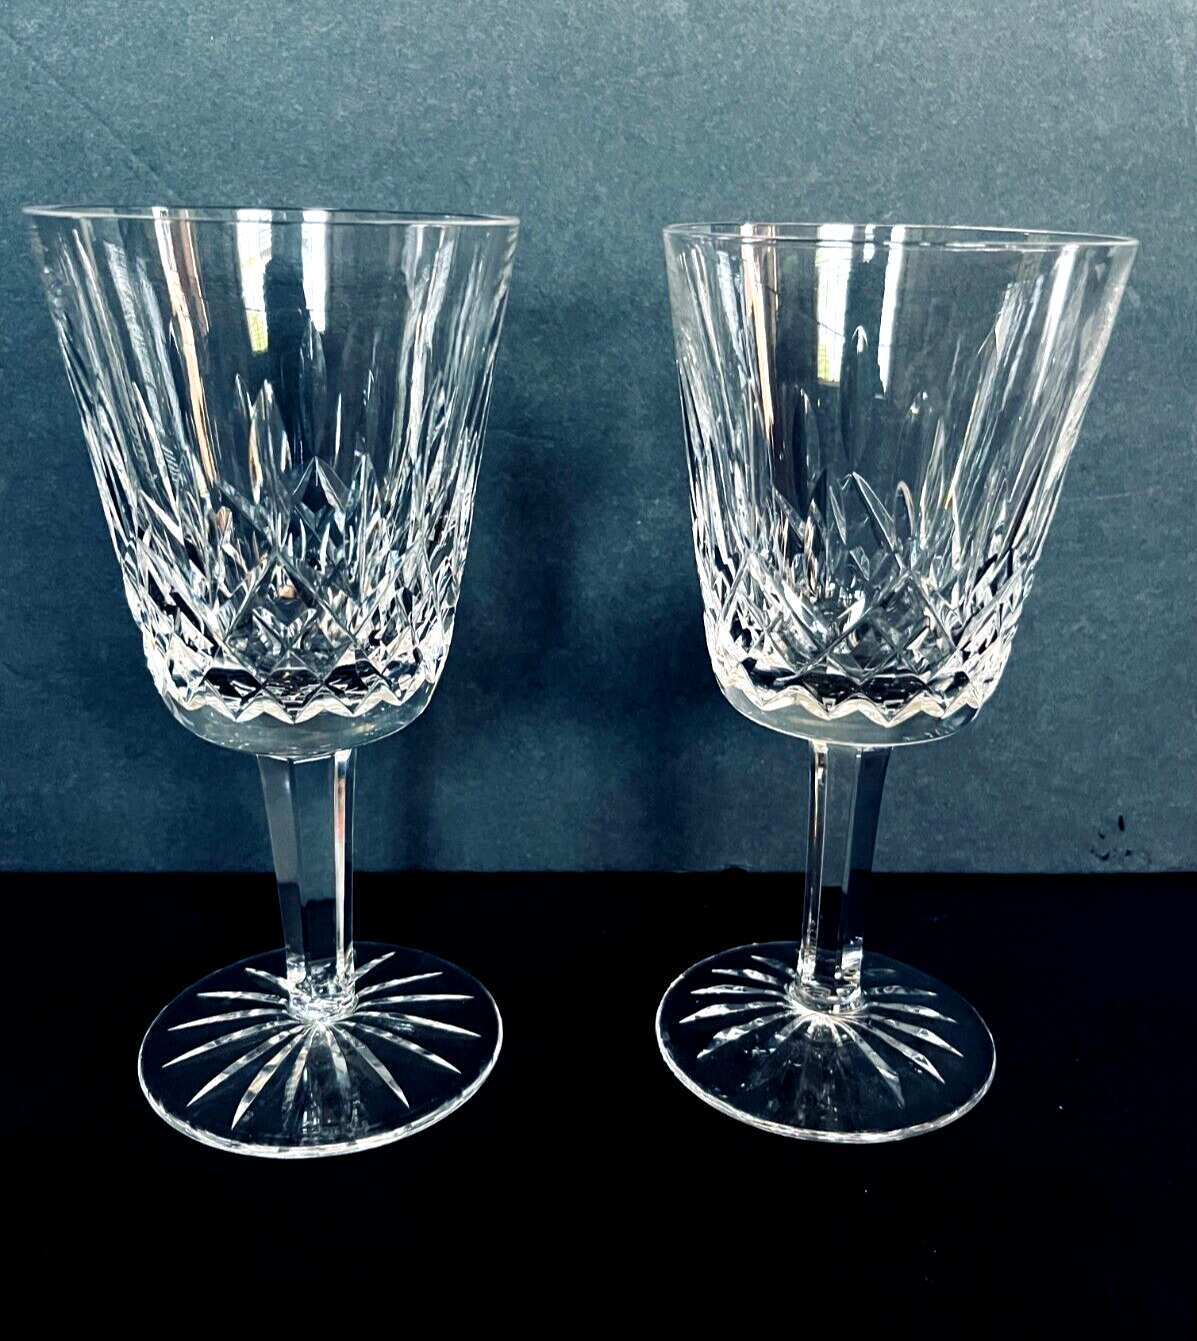 Waterford clear cut crystal Lismore water goblets 7 inch set of 2 excellent